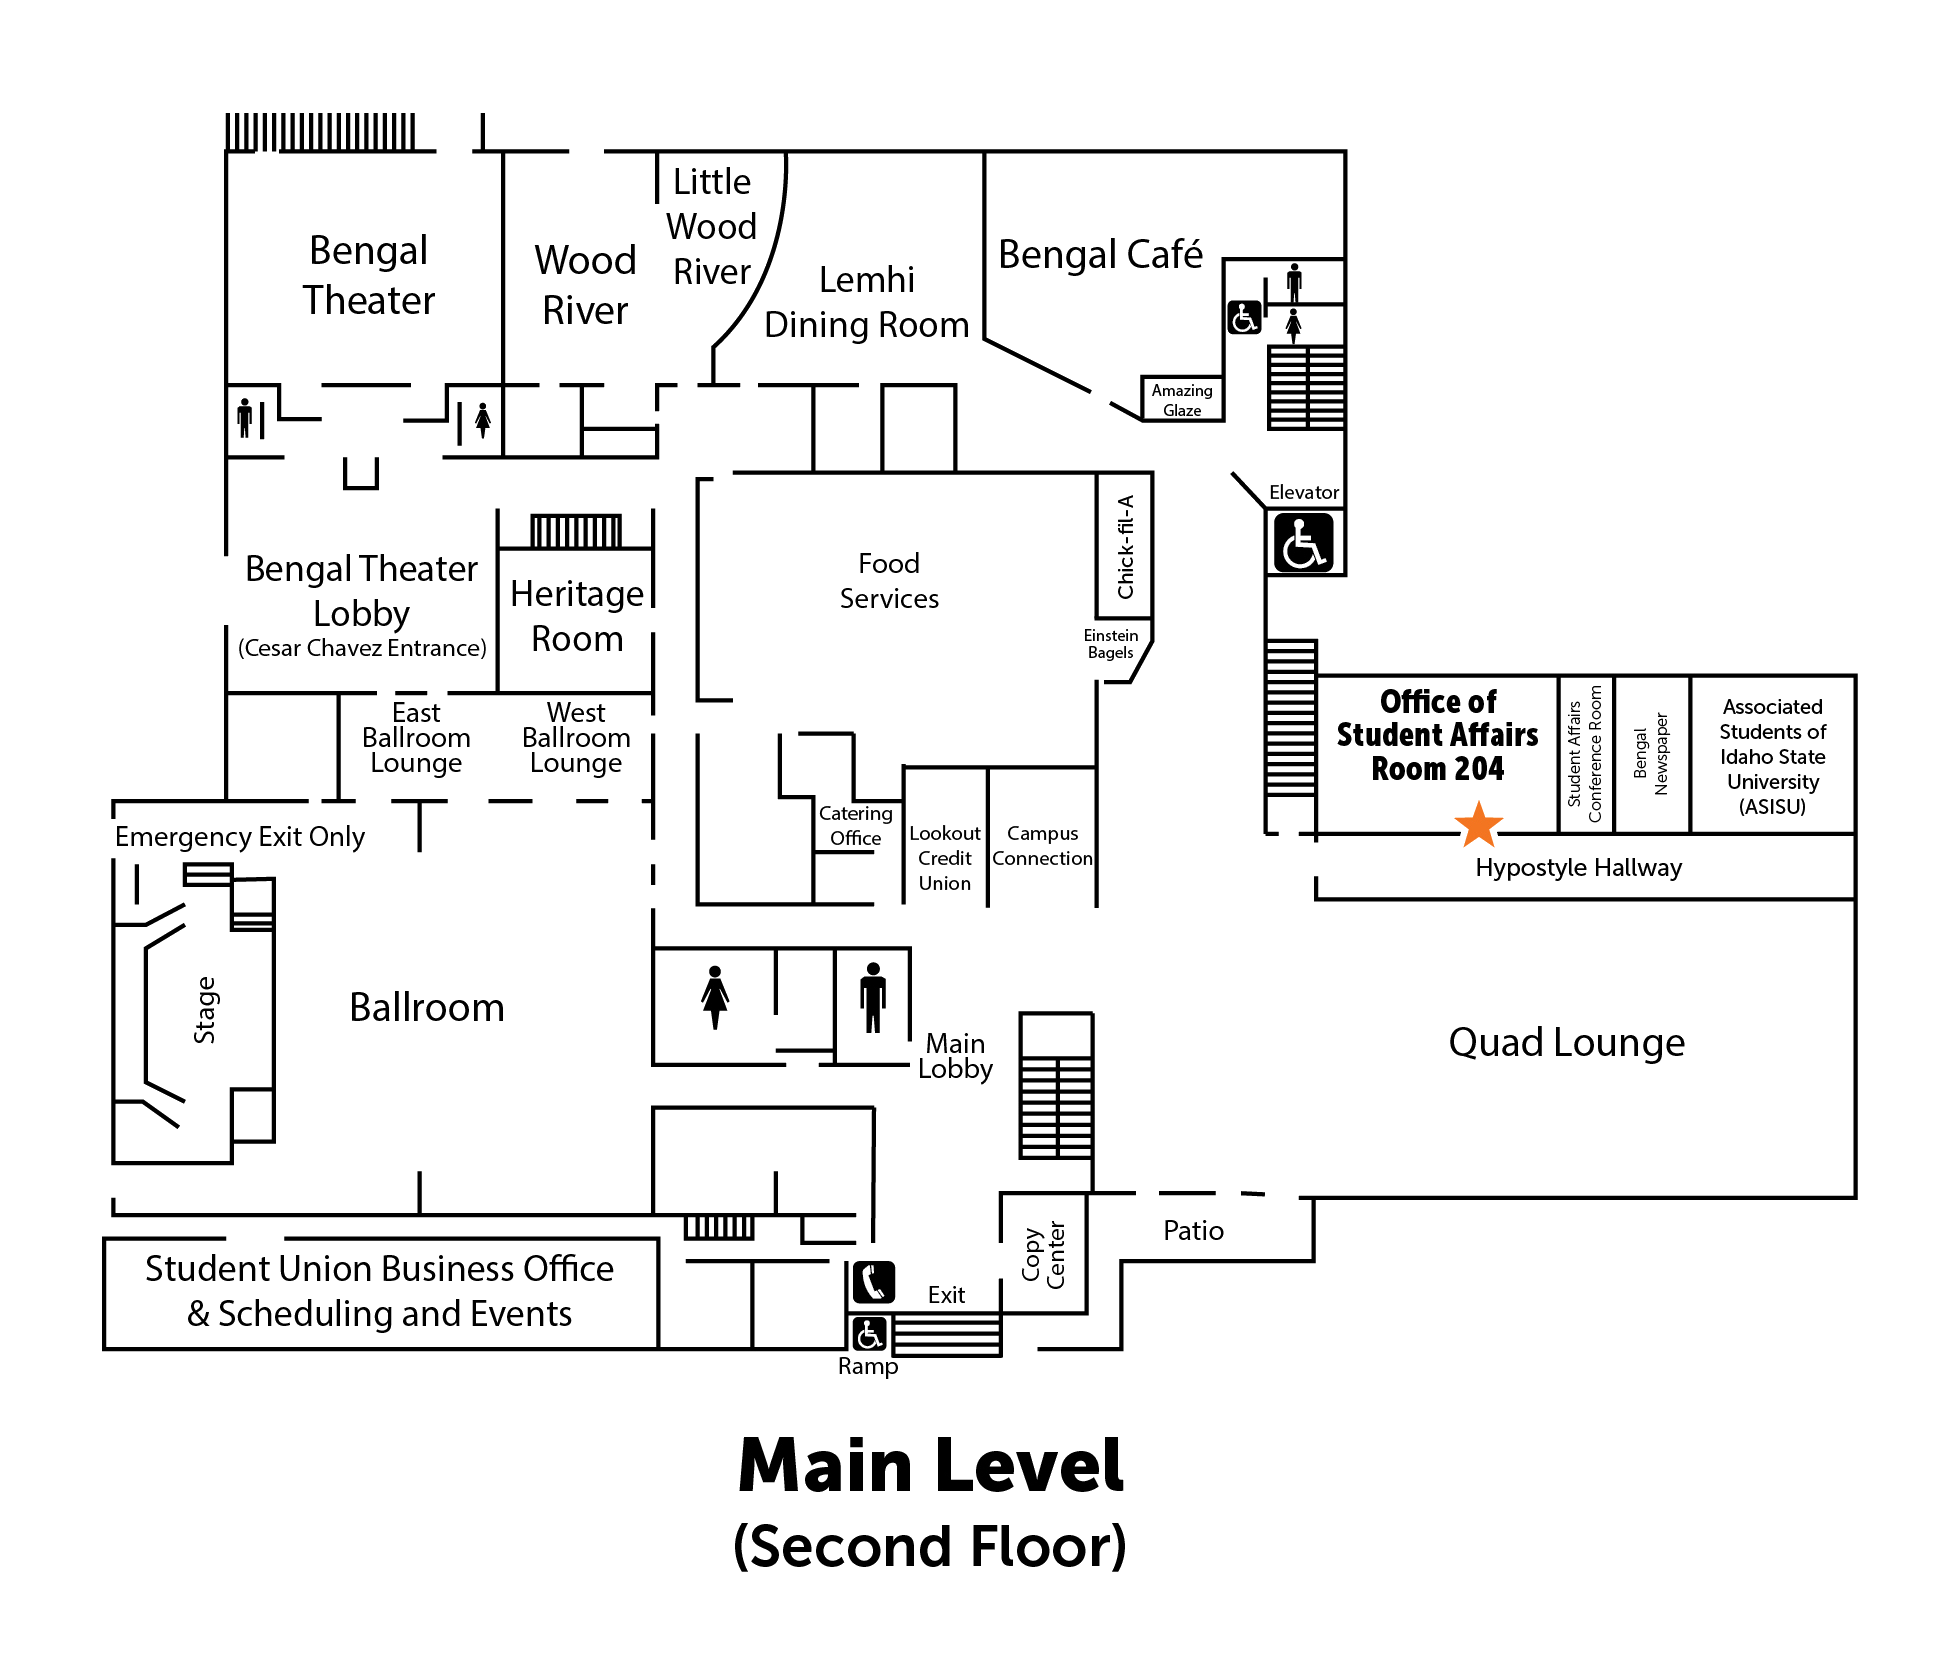 A map of the Student Union Building's second floor